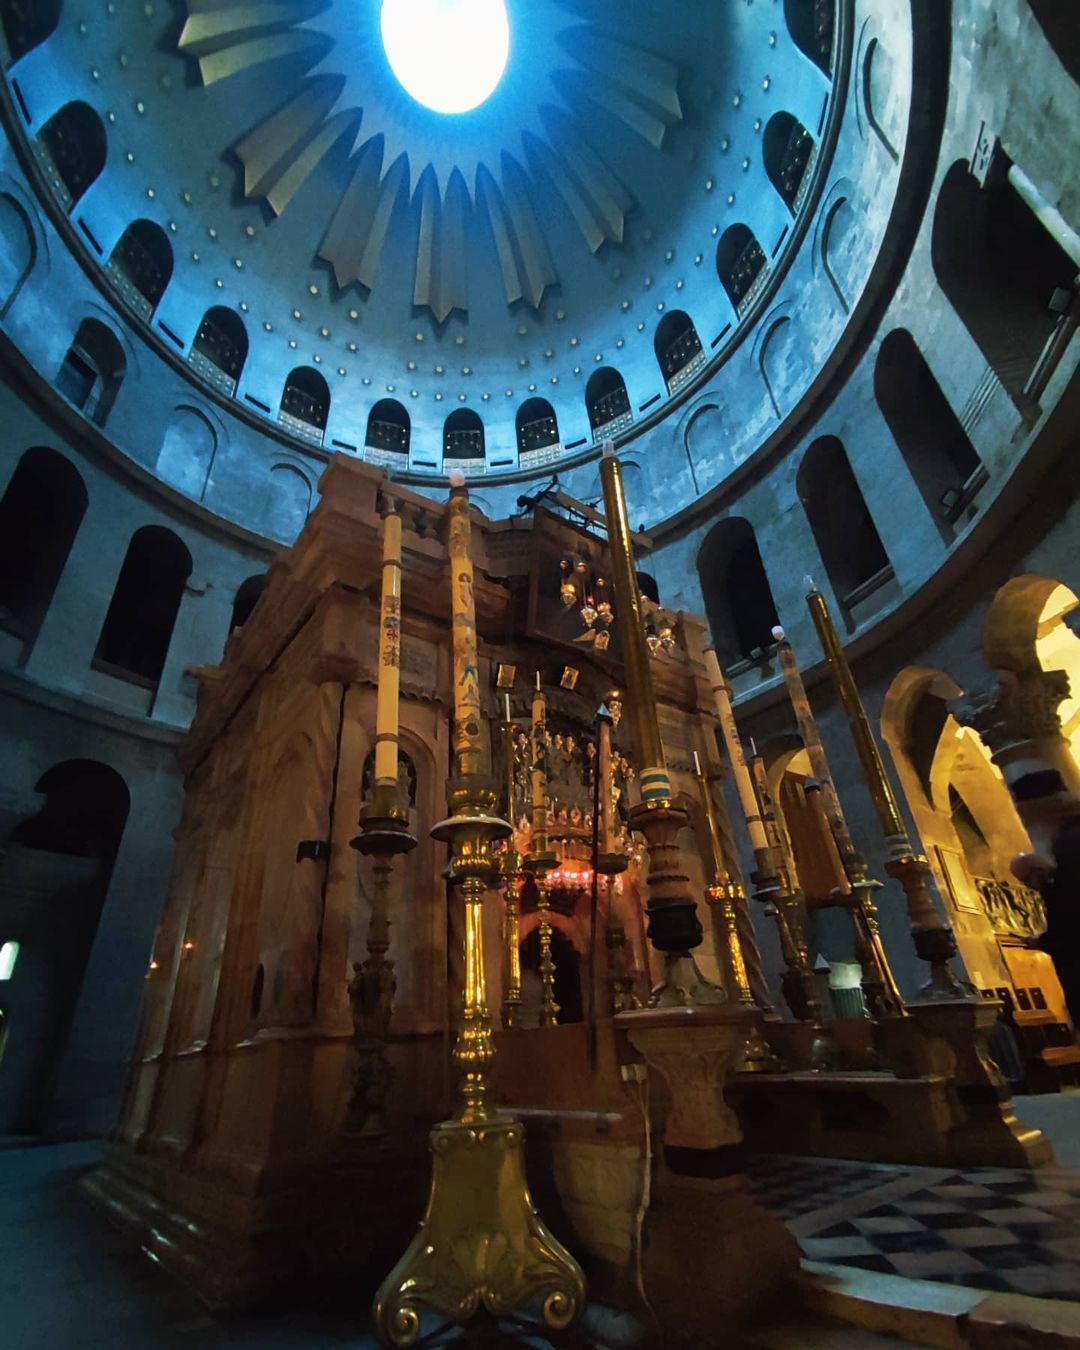 Exterior of the tomb of the Holy Sepulchre at the Church of the Holy Sepulchre in Jerusalem